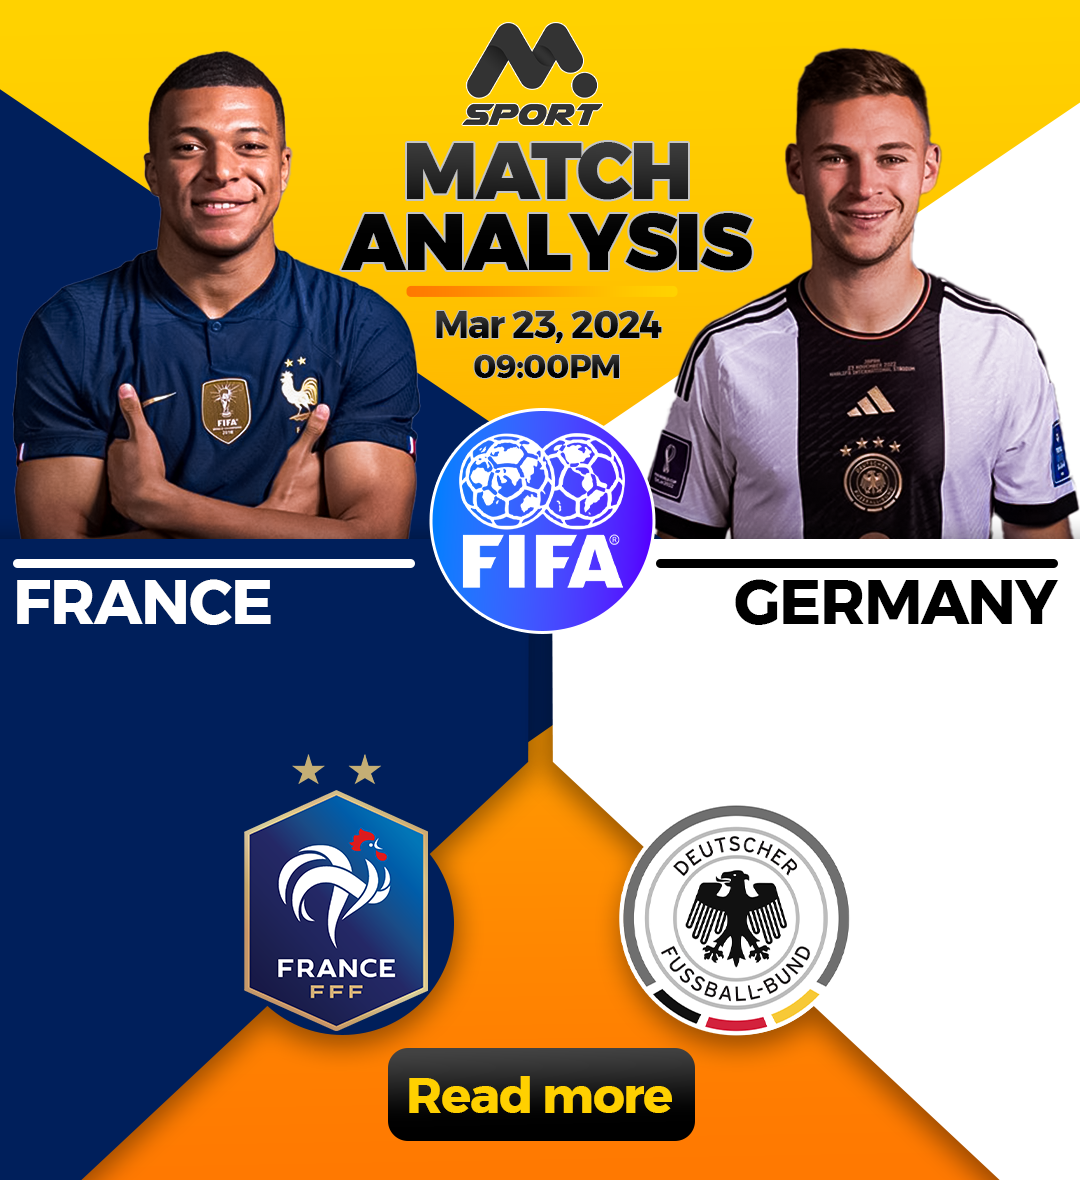 Euro 2024 Preparations Intensify as France Clash with Germany in Thrilling Friendly Encounter